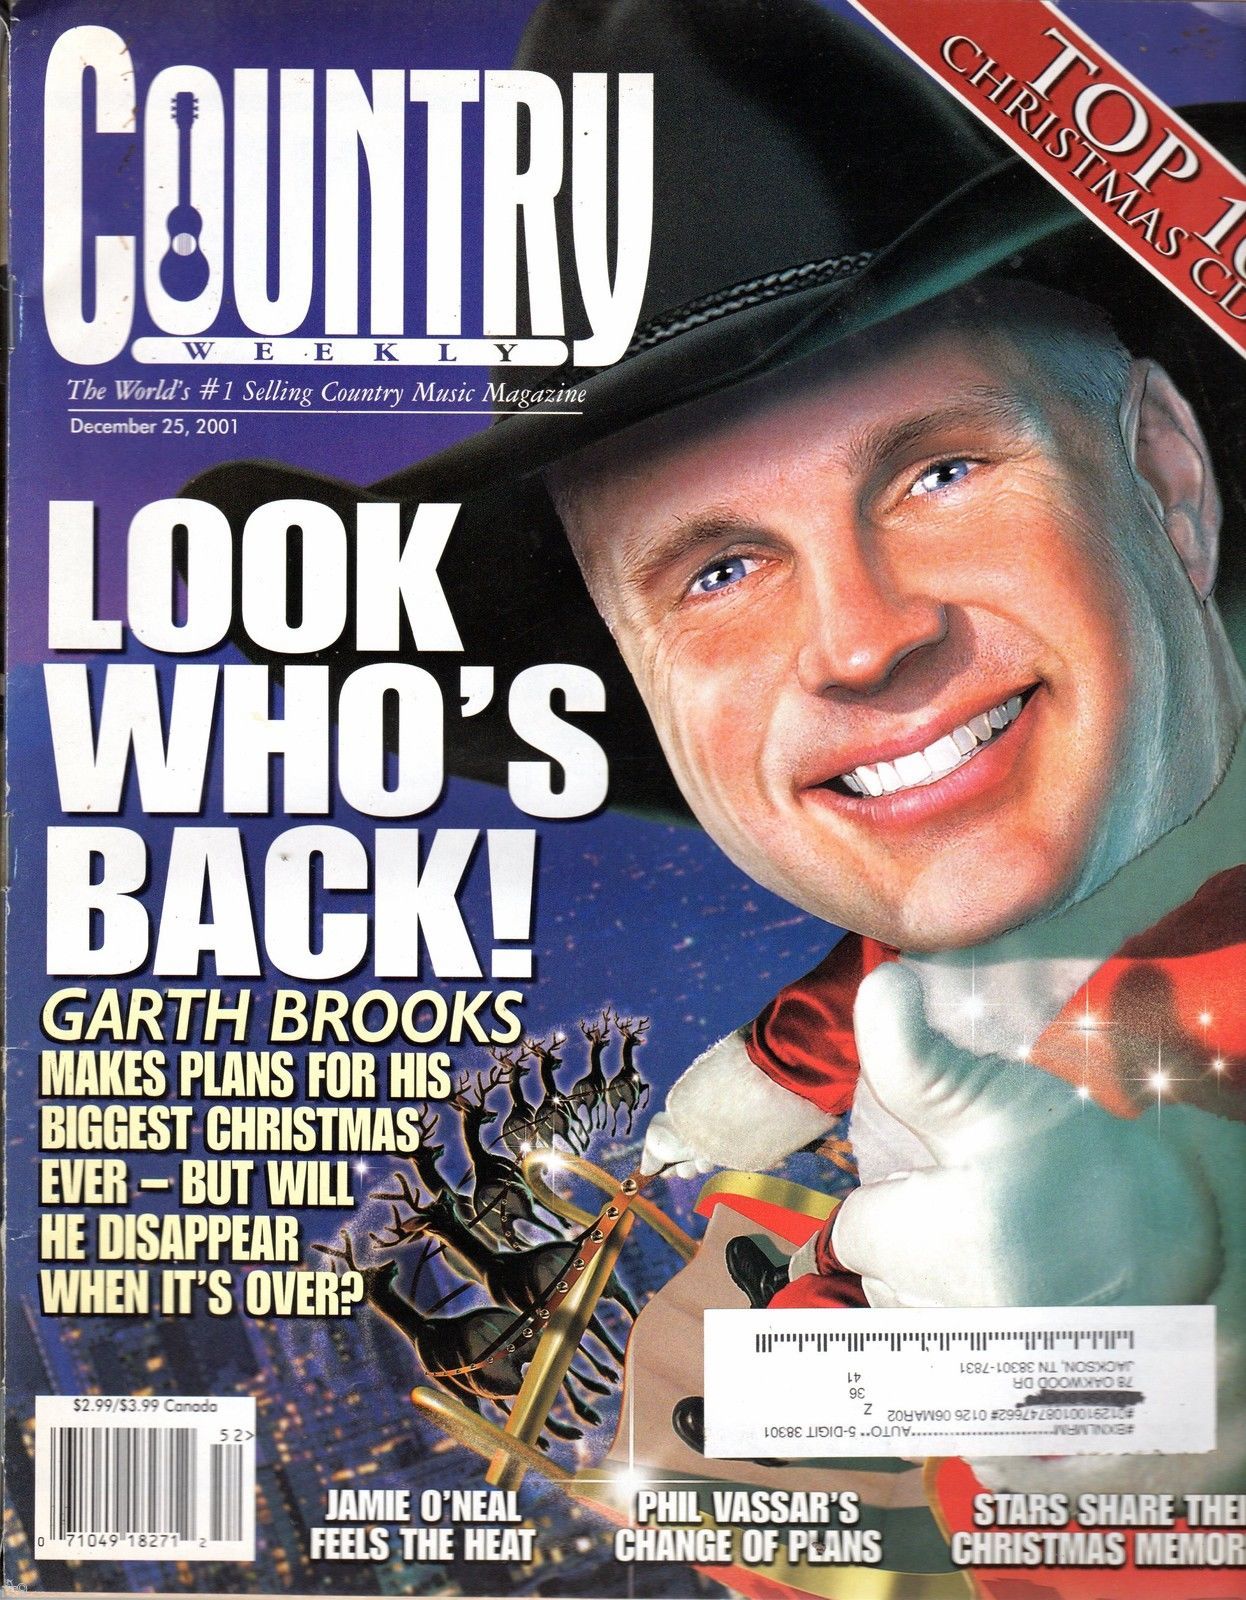 Primary image for Country Weekly Magazine December 25, 2001 Garth Brooks, O'Neal, Vassar